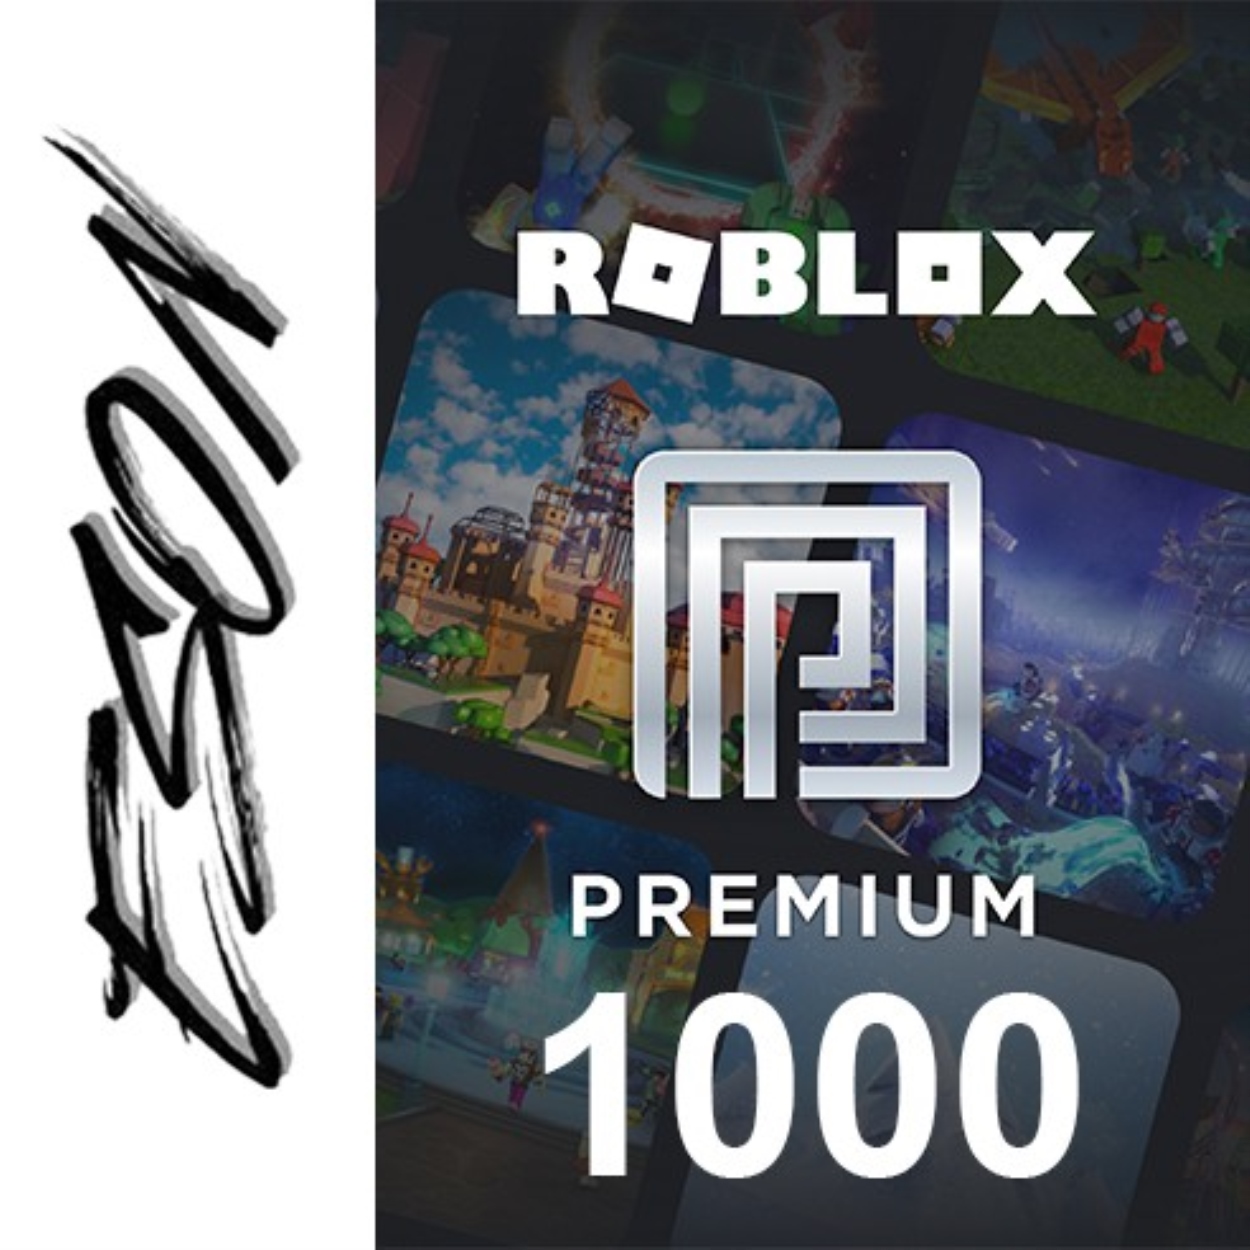 Buy Robux Shop Buy Robux With Great Discounts And Prices Online Lazada Philippines - robux price list philippines